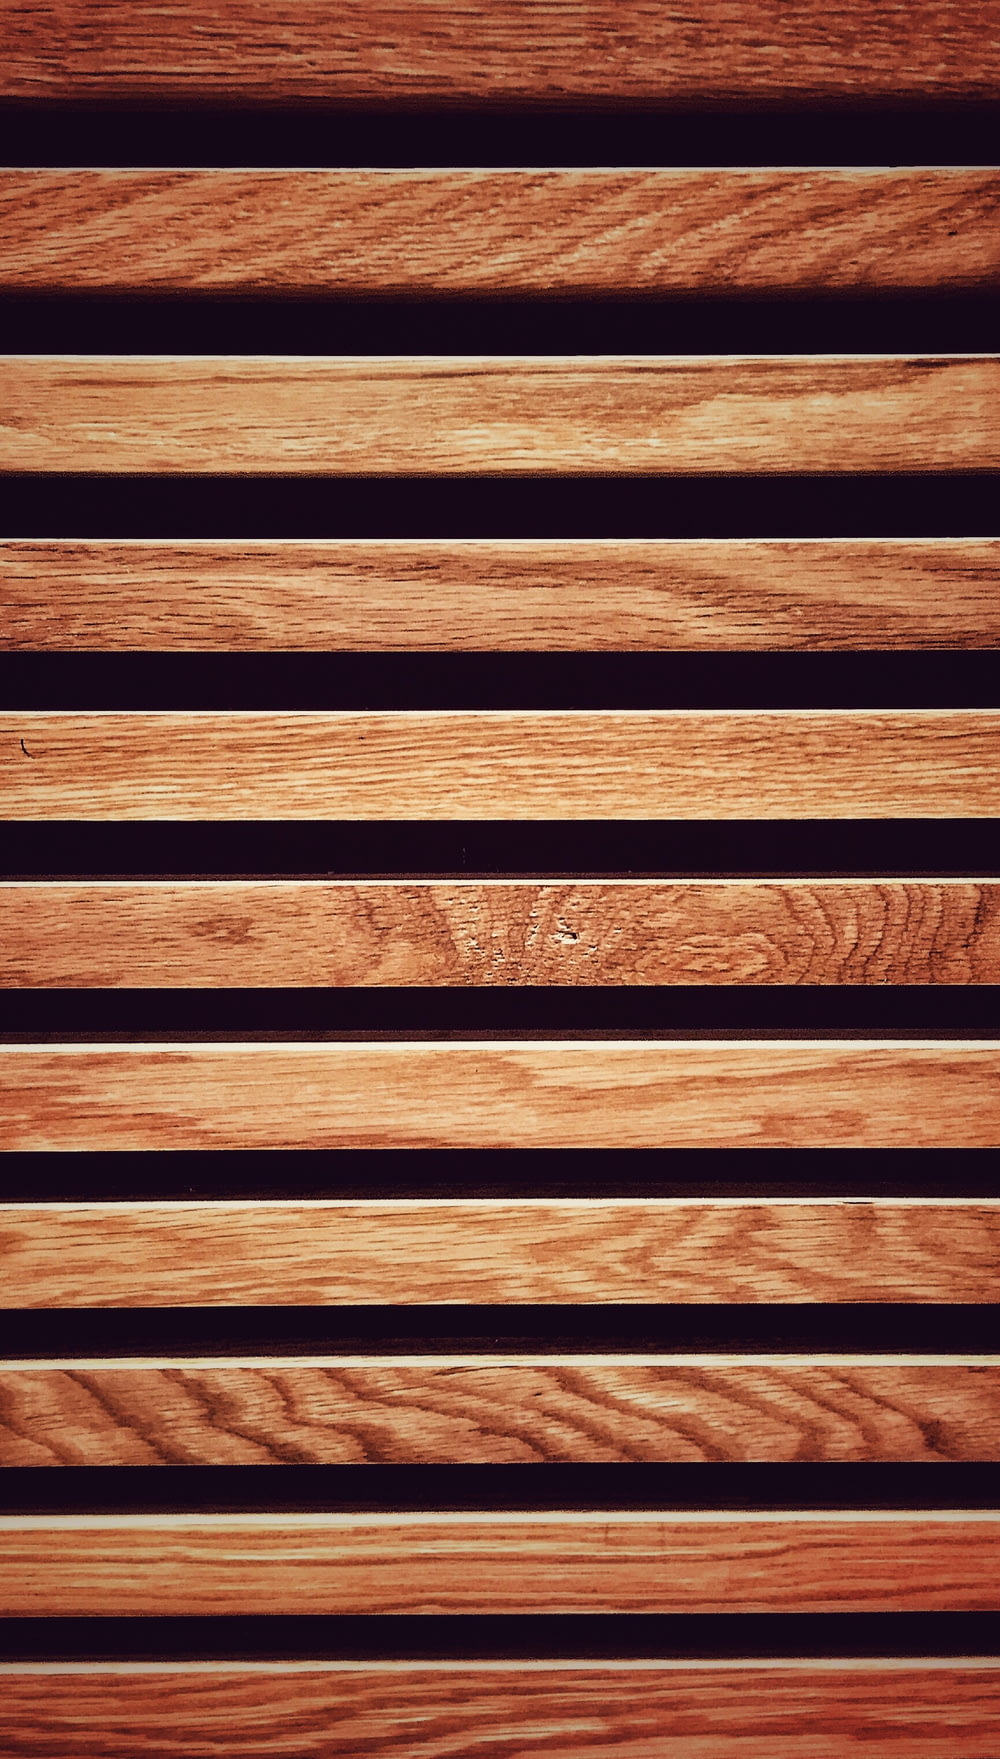 a close up of a wooden slatted surface